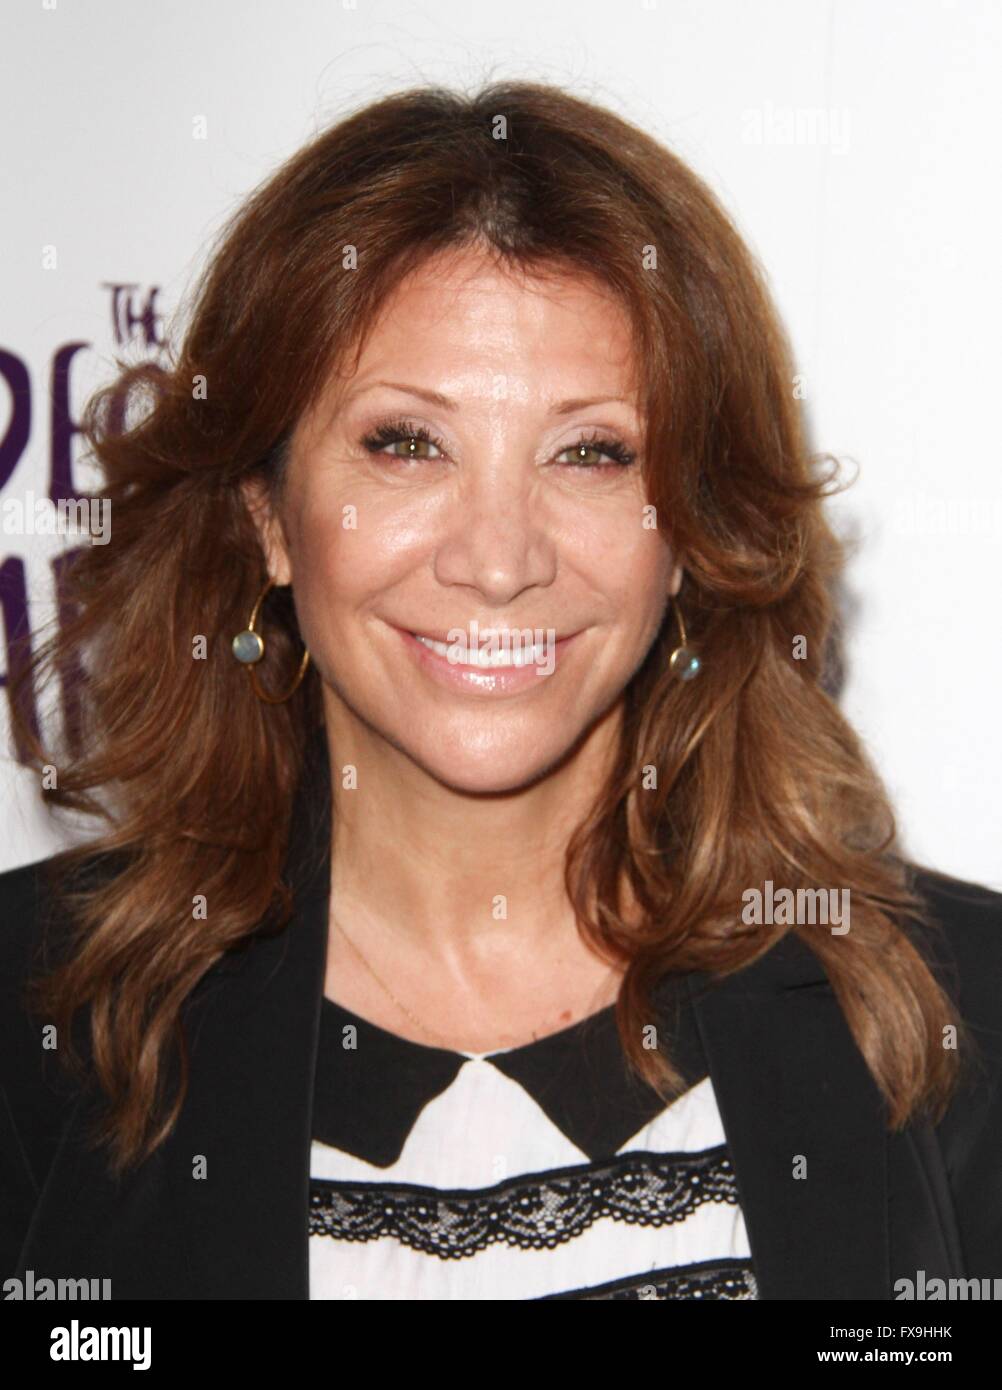 Cheri Oteri attends The Student Showcase of Films during The Palm Beach Int...